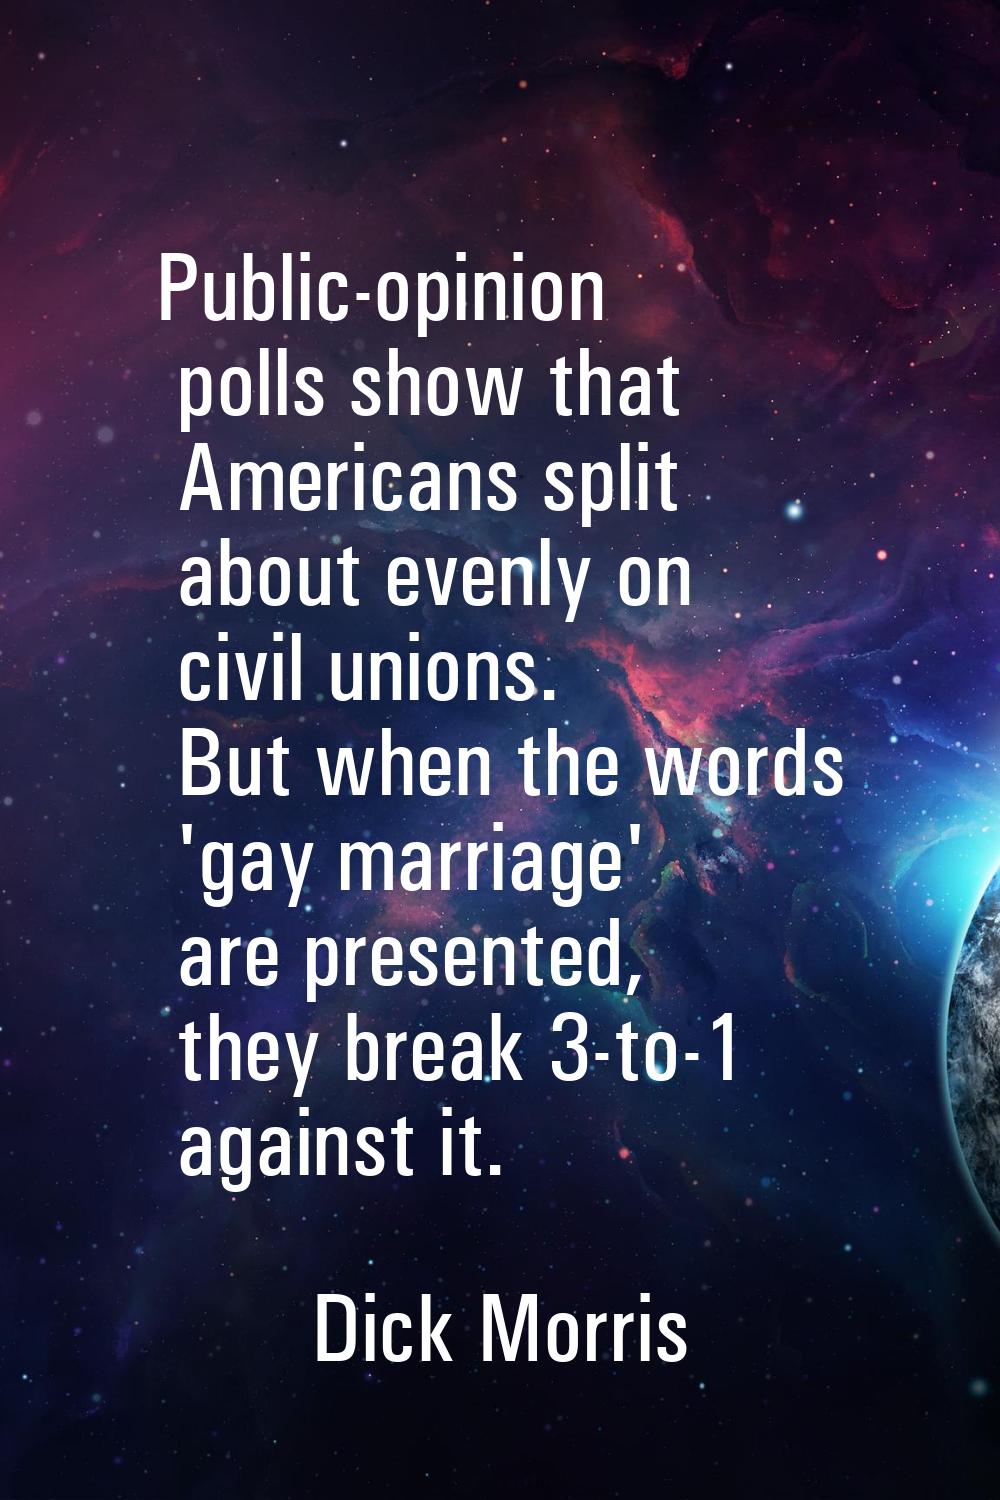 Public-opinion polls show that Americans split about evenly on civil unions. But when the words 'ga